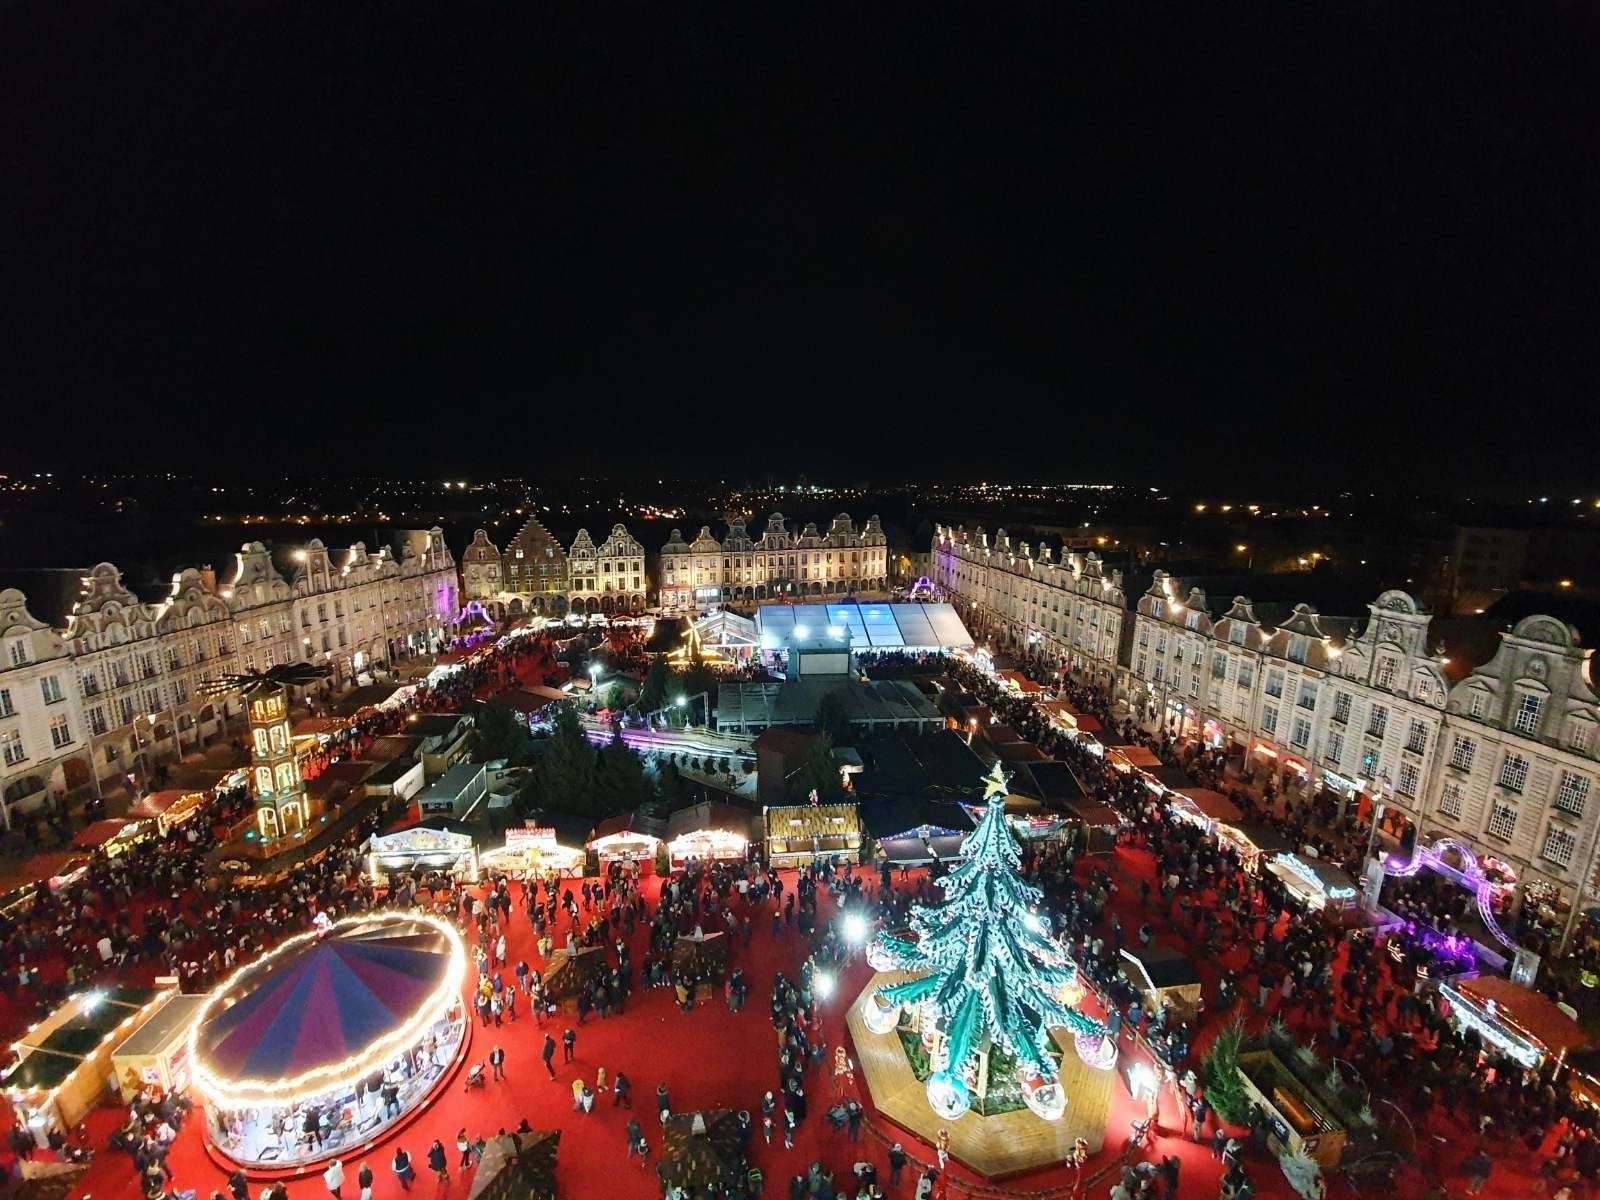 A view of the Arras Christmas market from the wheel (23230507)